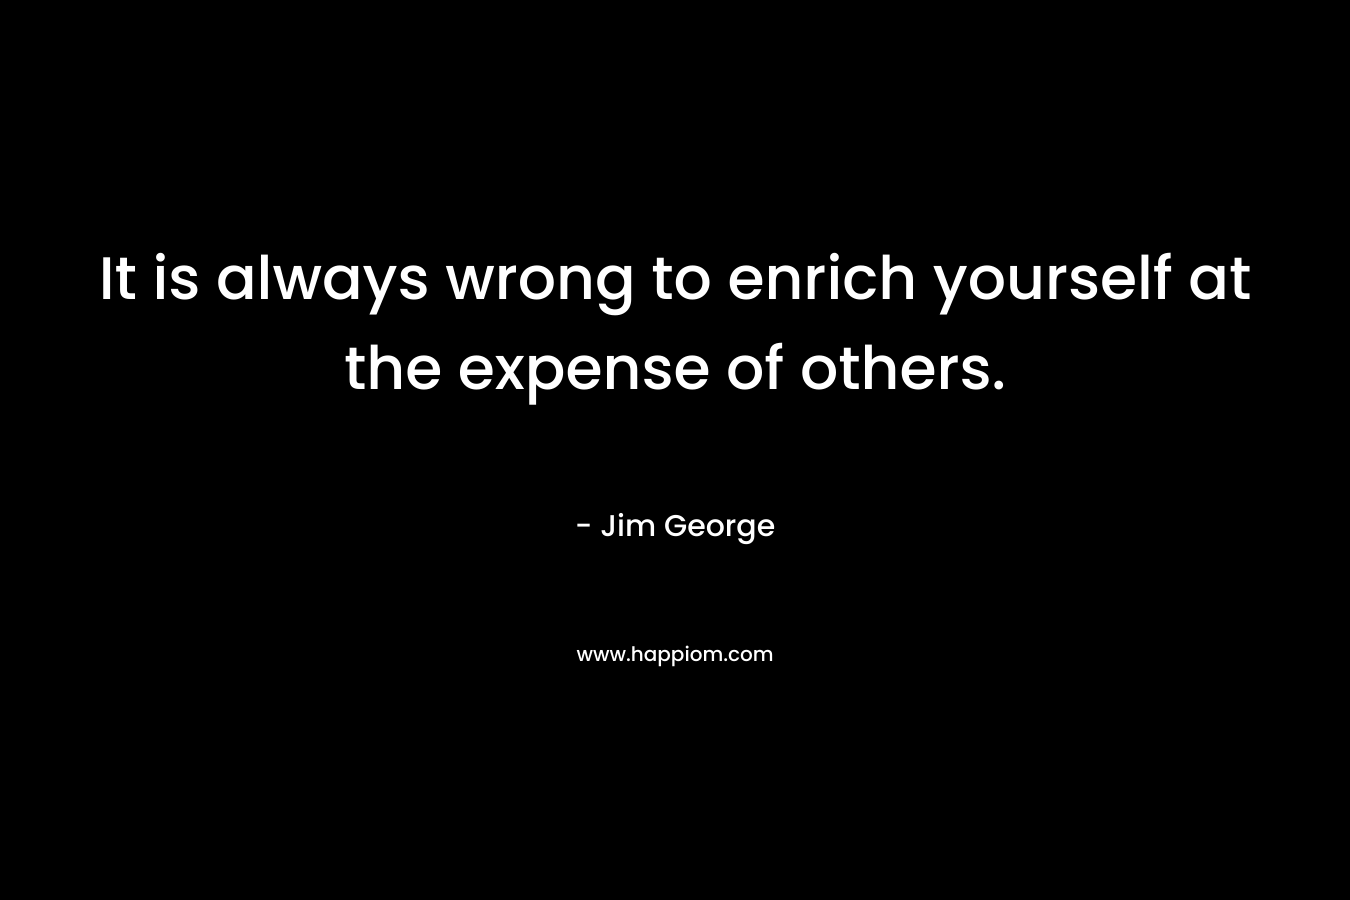 It is always wrong to enrich yourself at the expense of others.